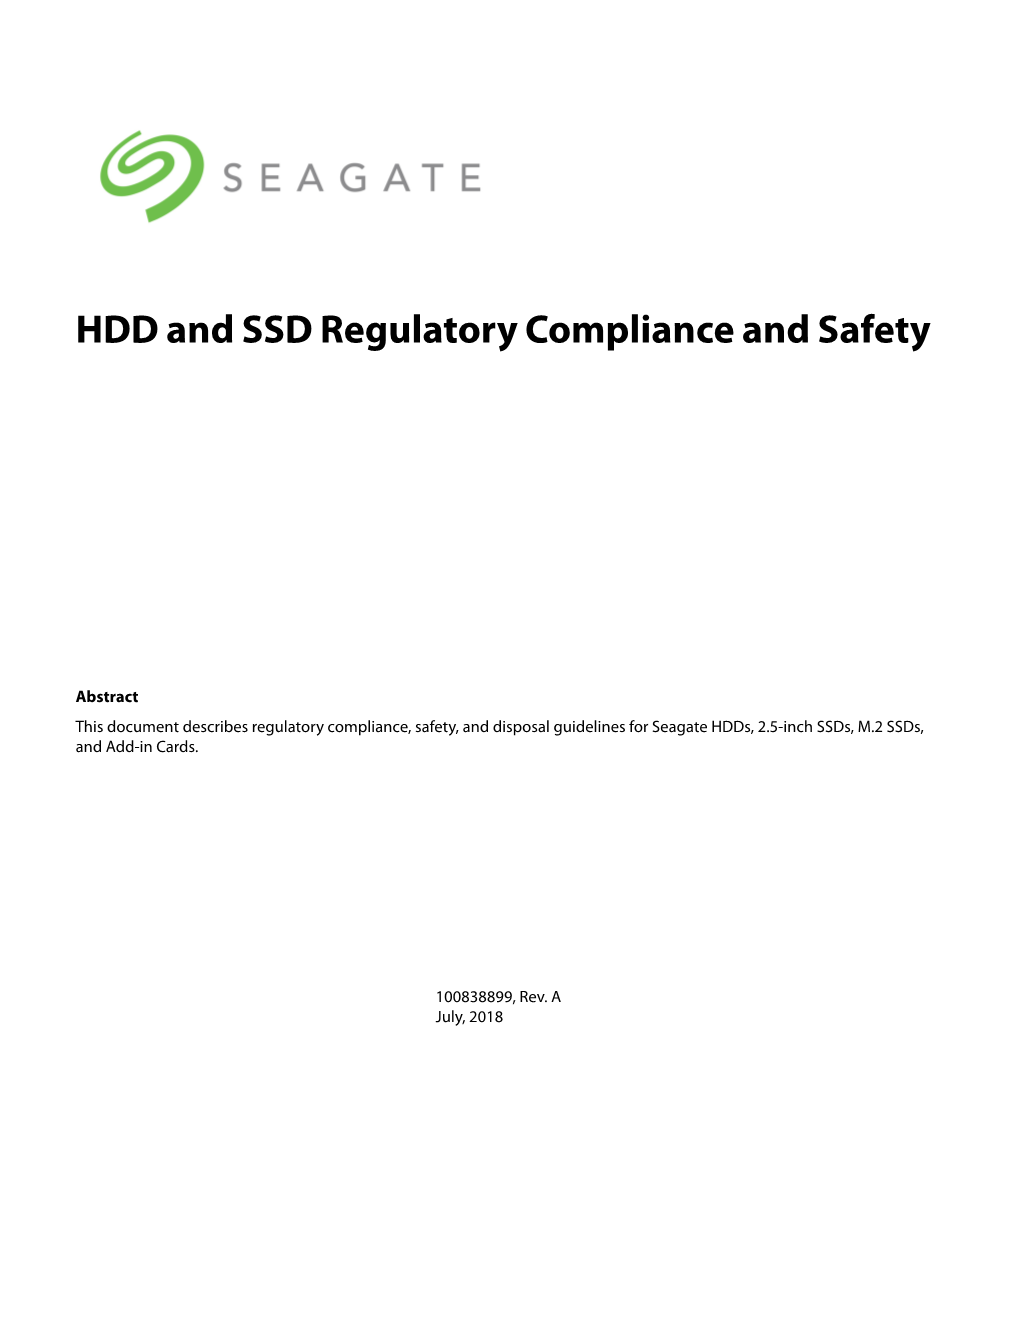 HDD and SSD Regulatory Compliance and Safety